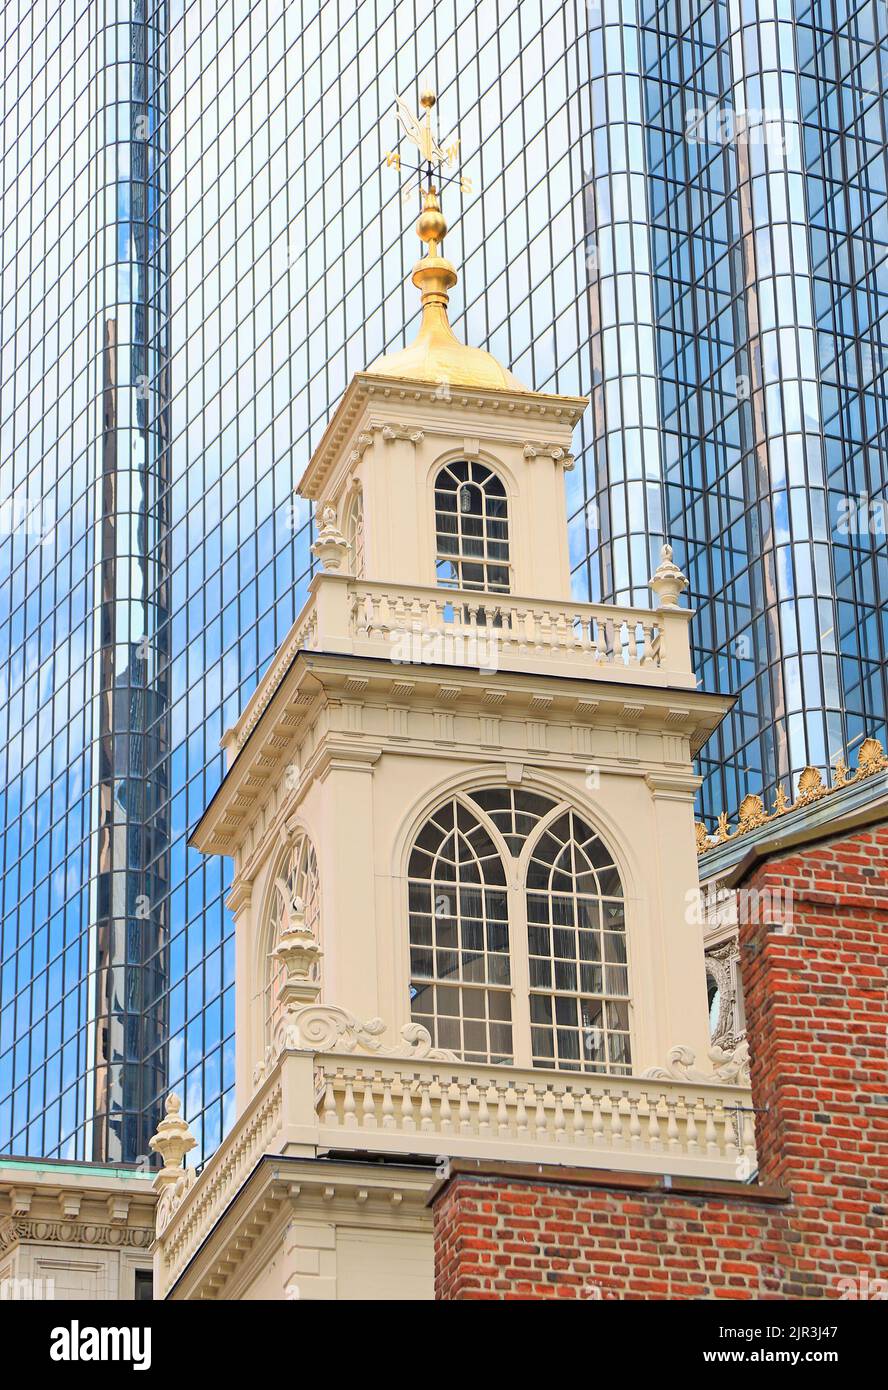 The Old State House of Boston, detail Stock Photo